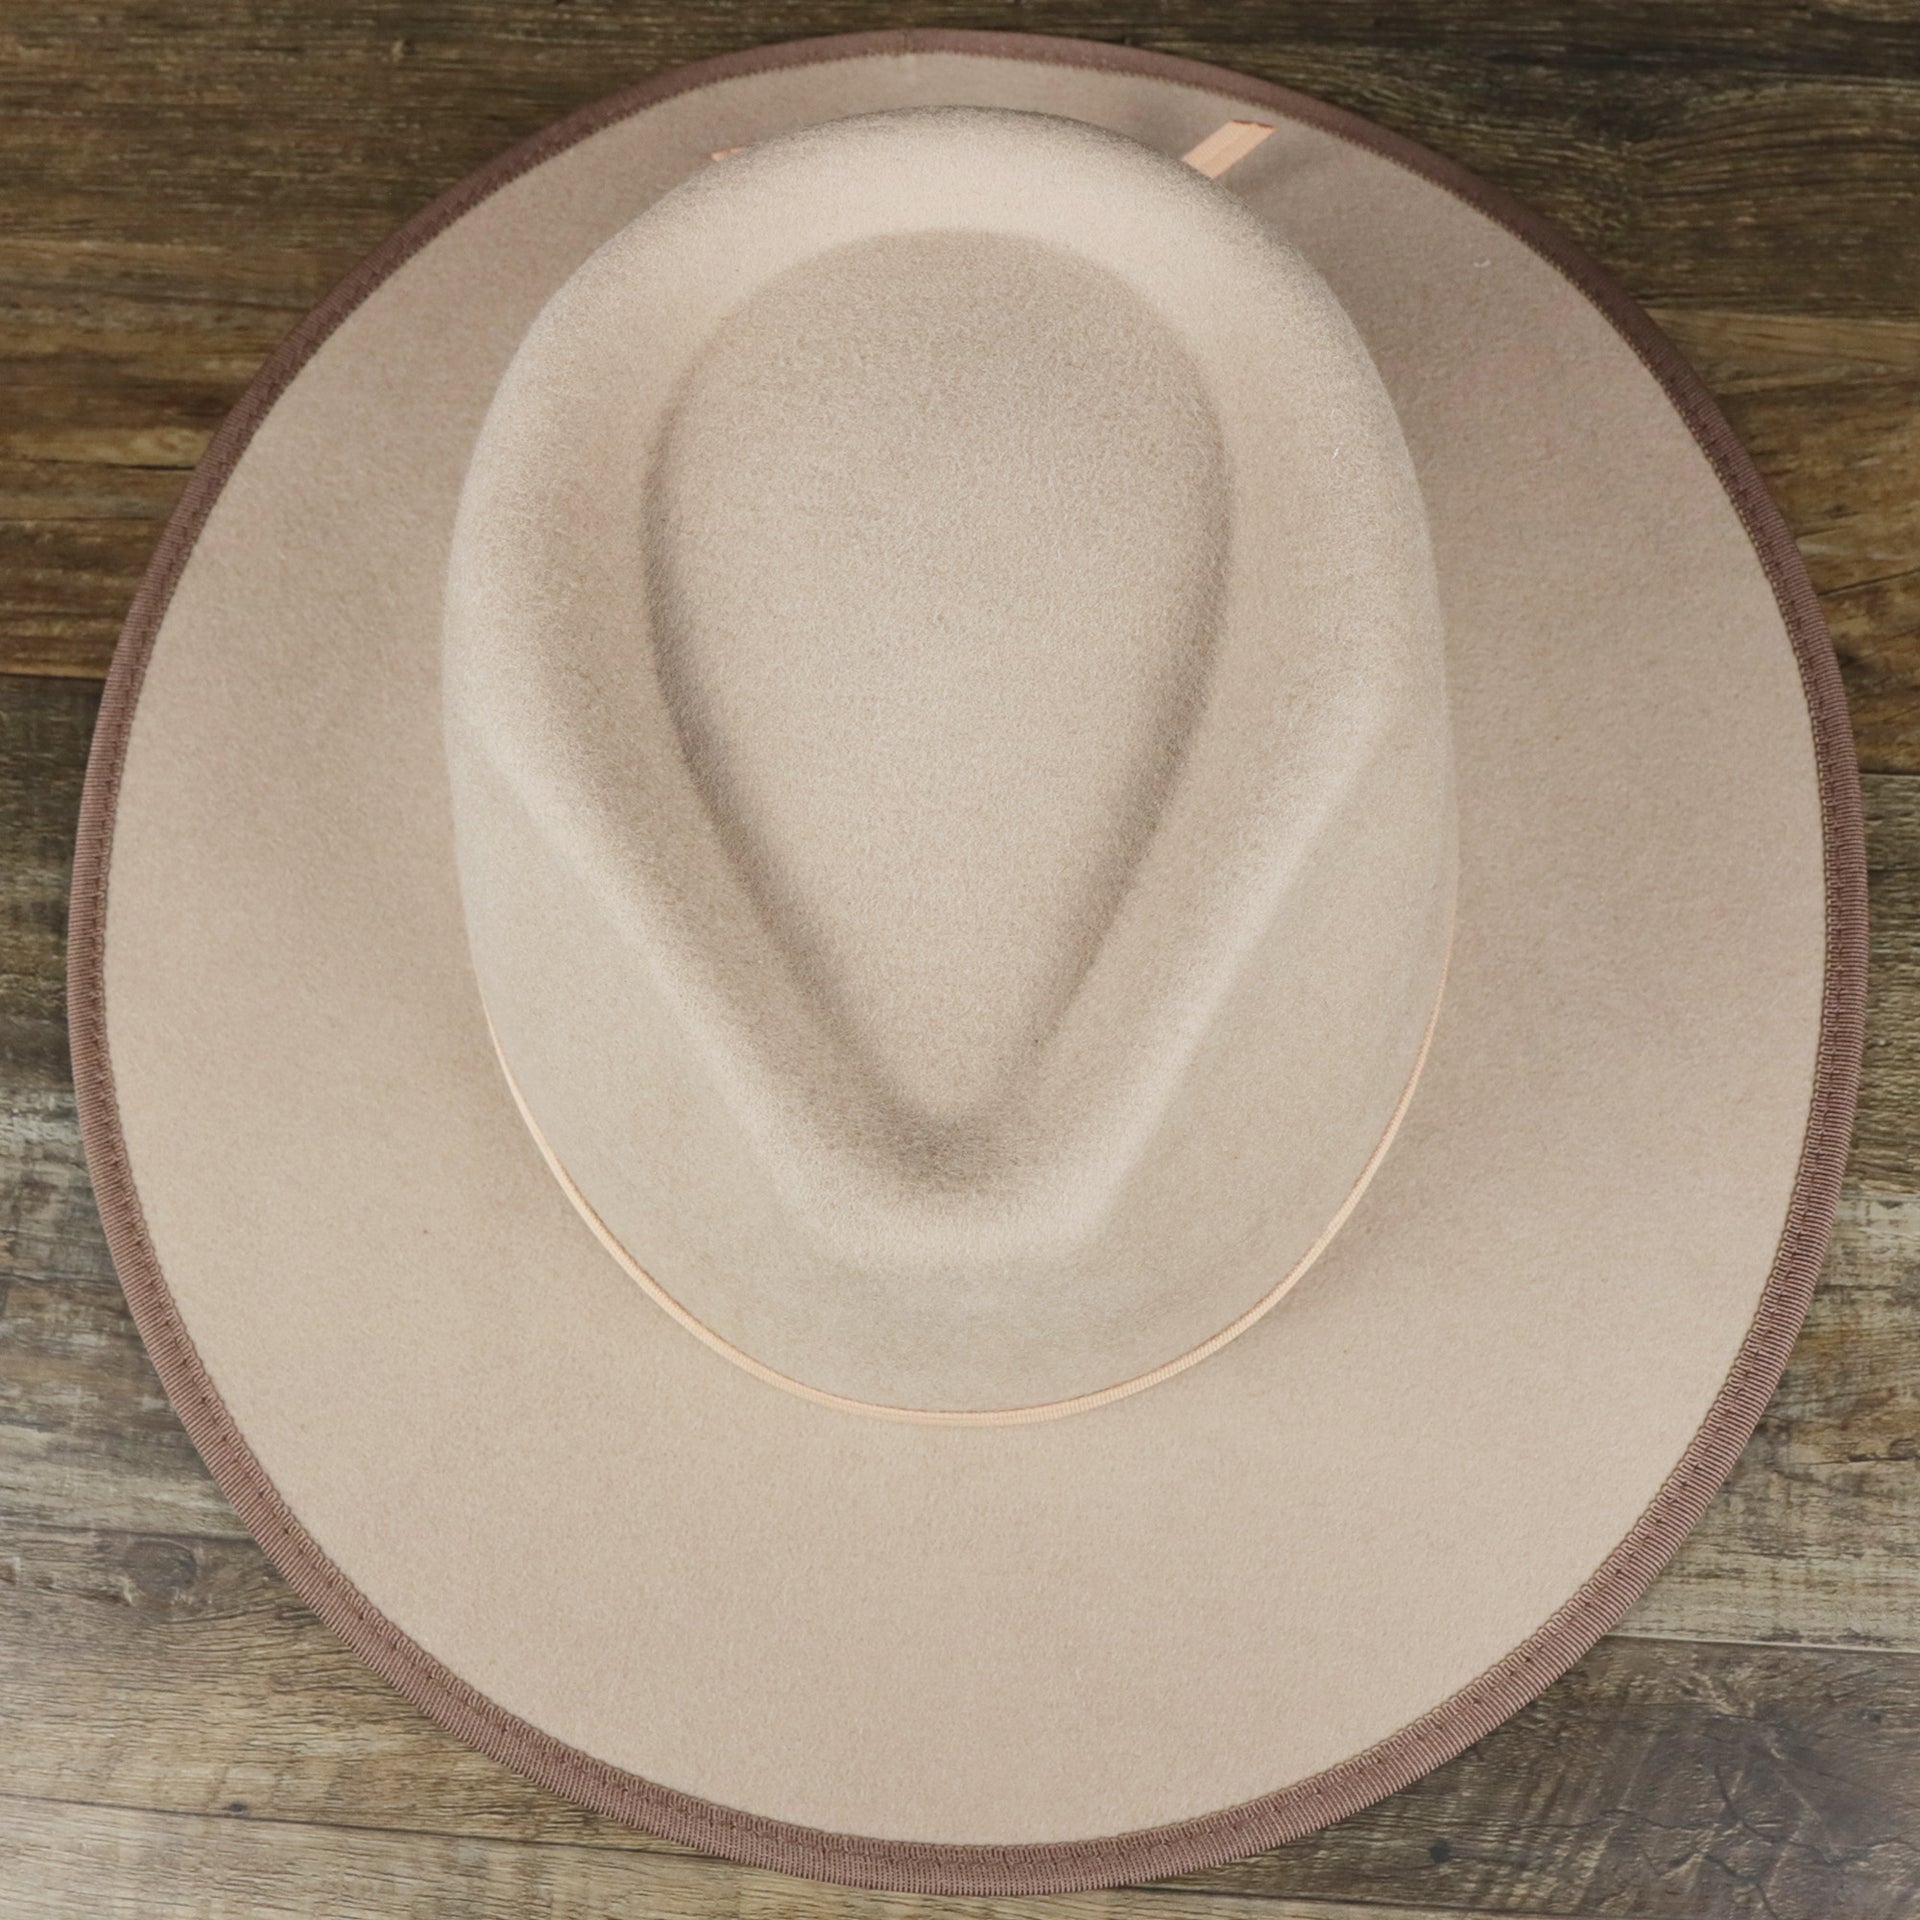 An overhead view of the Wide Brim Ribbon Edge Taupe Fedora Hat with Brown Paisley Silk Interior | Zertrue 100% Australian Wool